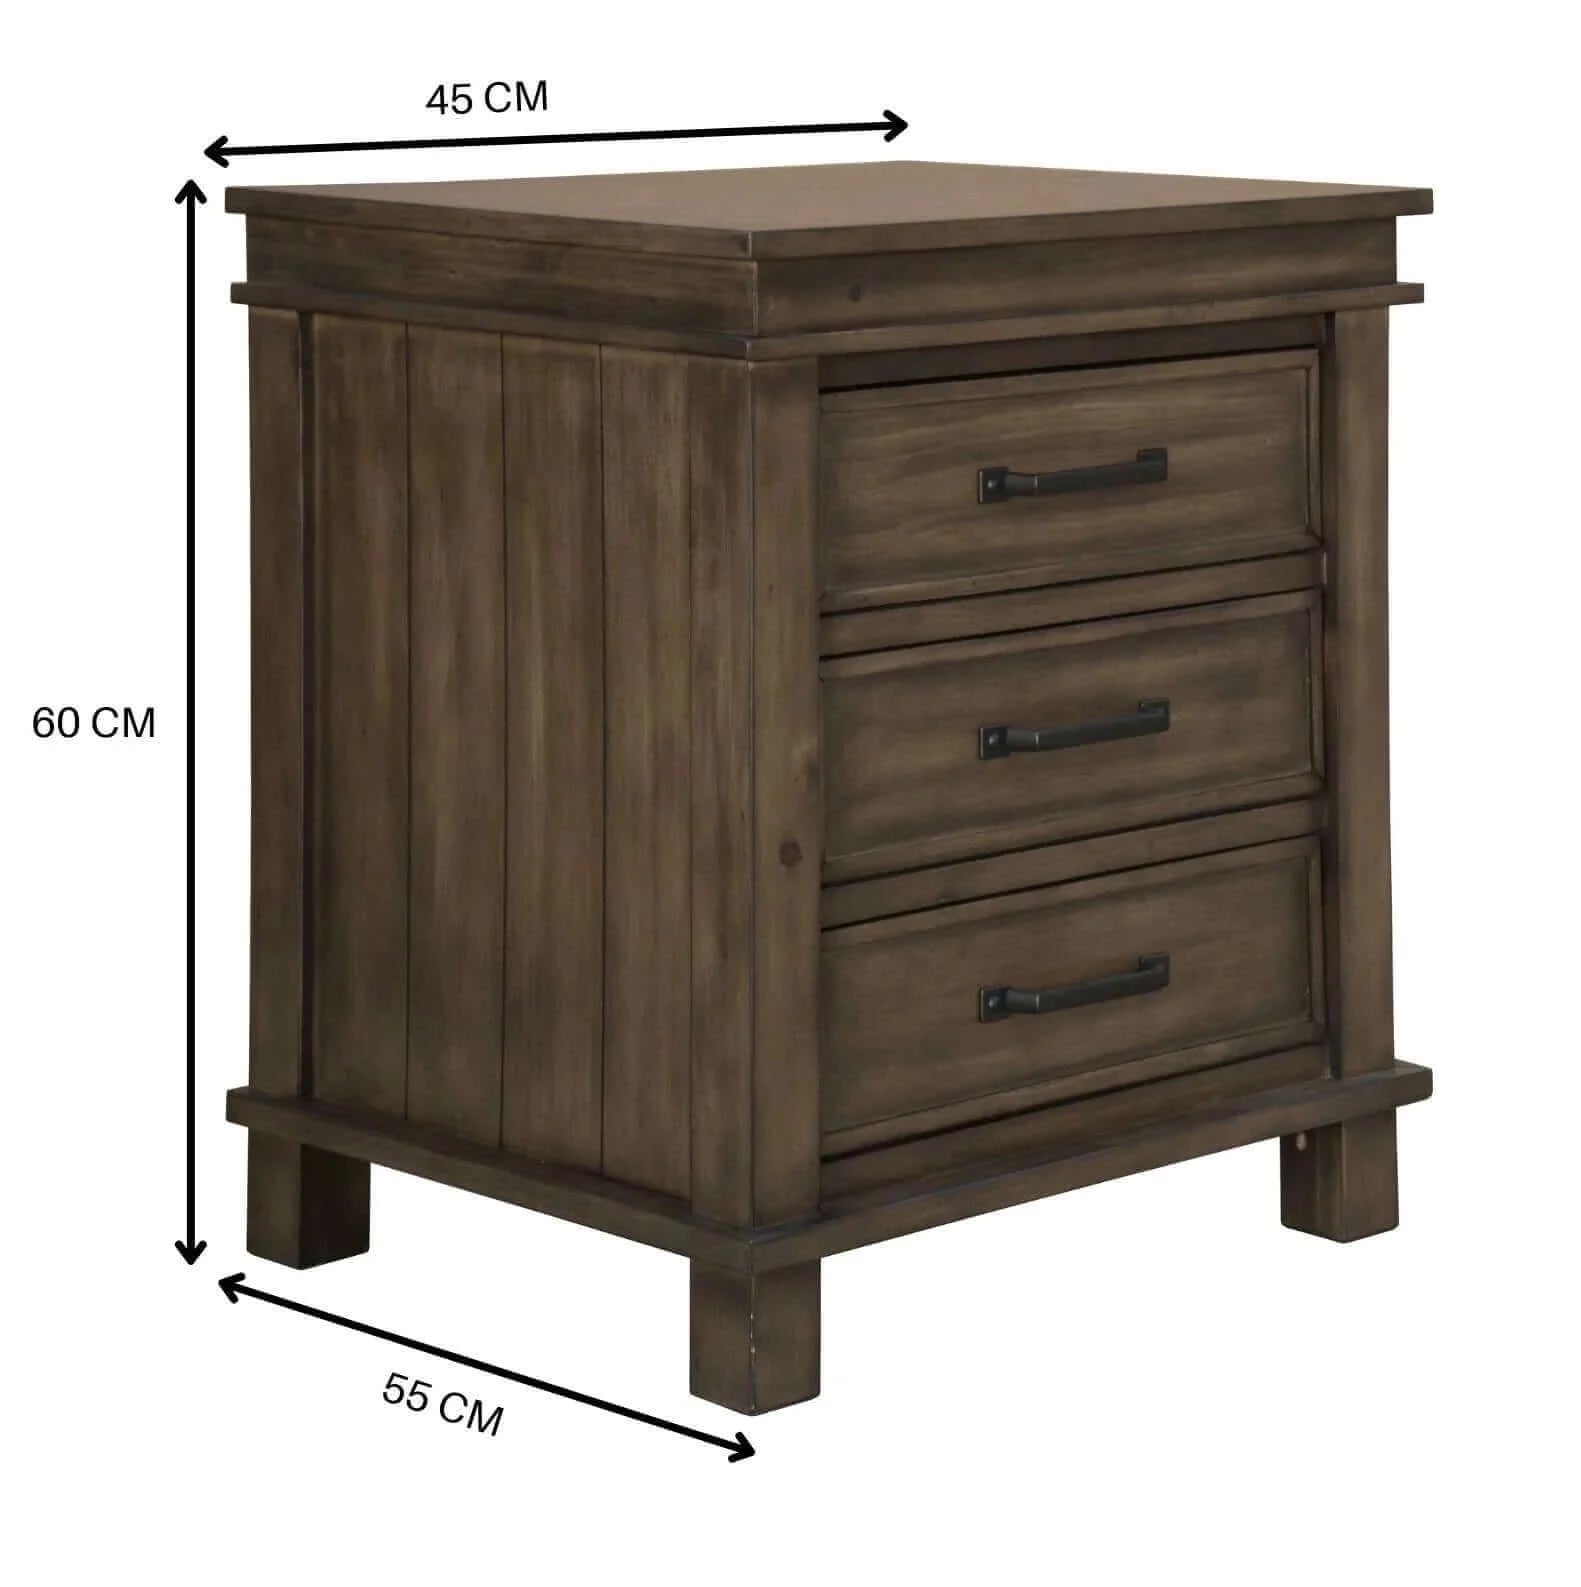 Buy lily bedside tables 3 drawers storage cabinet shelf side end table - rustic grey - upinteriors-Upinteriors